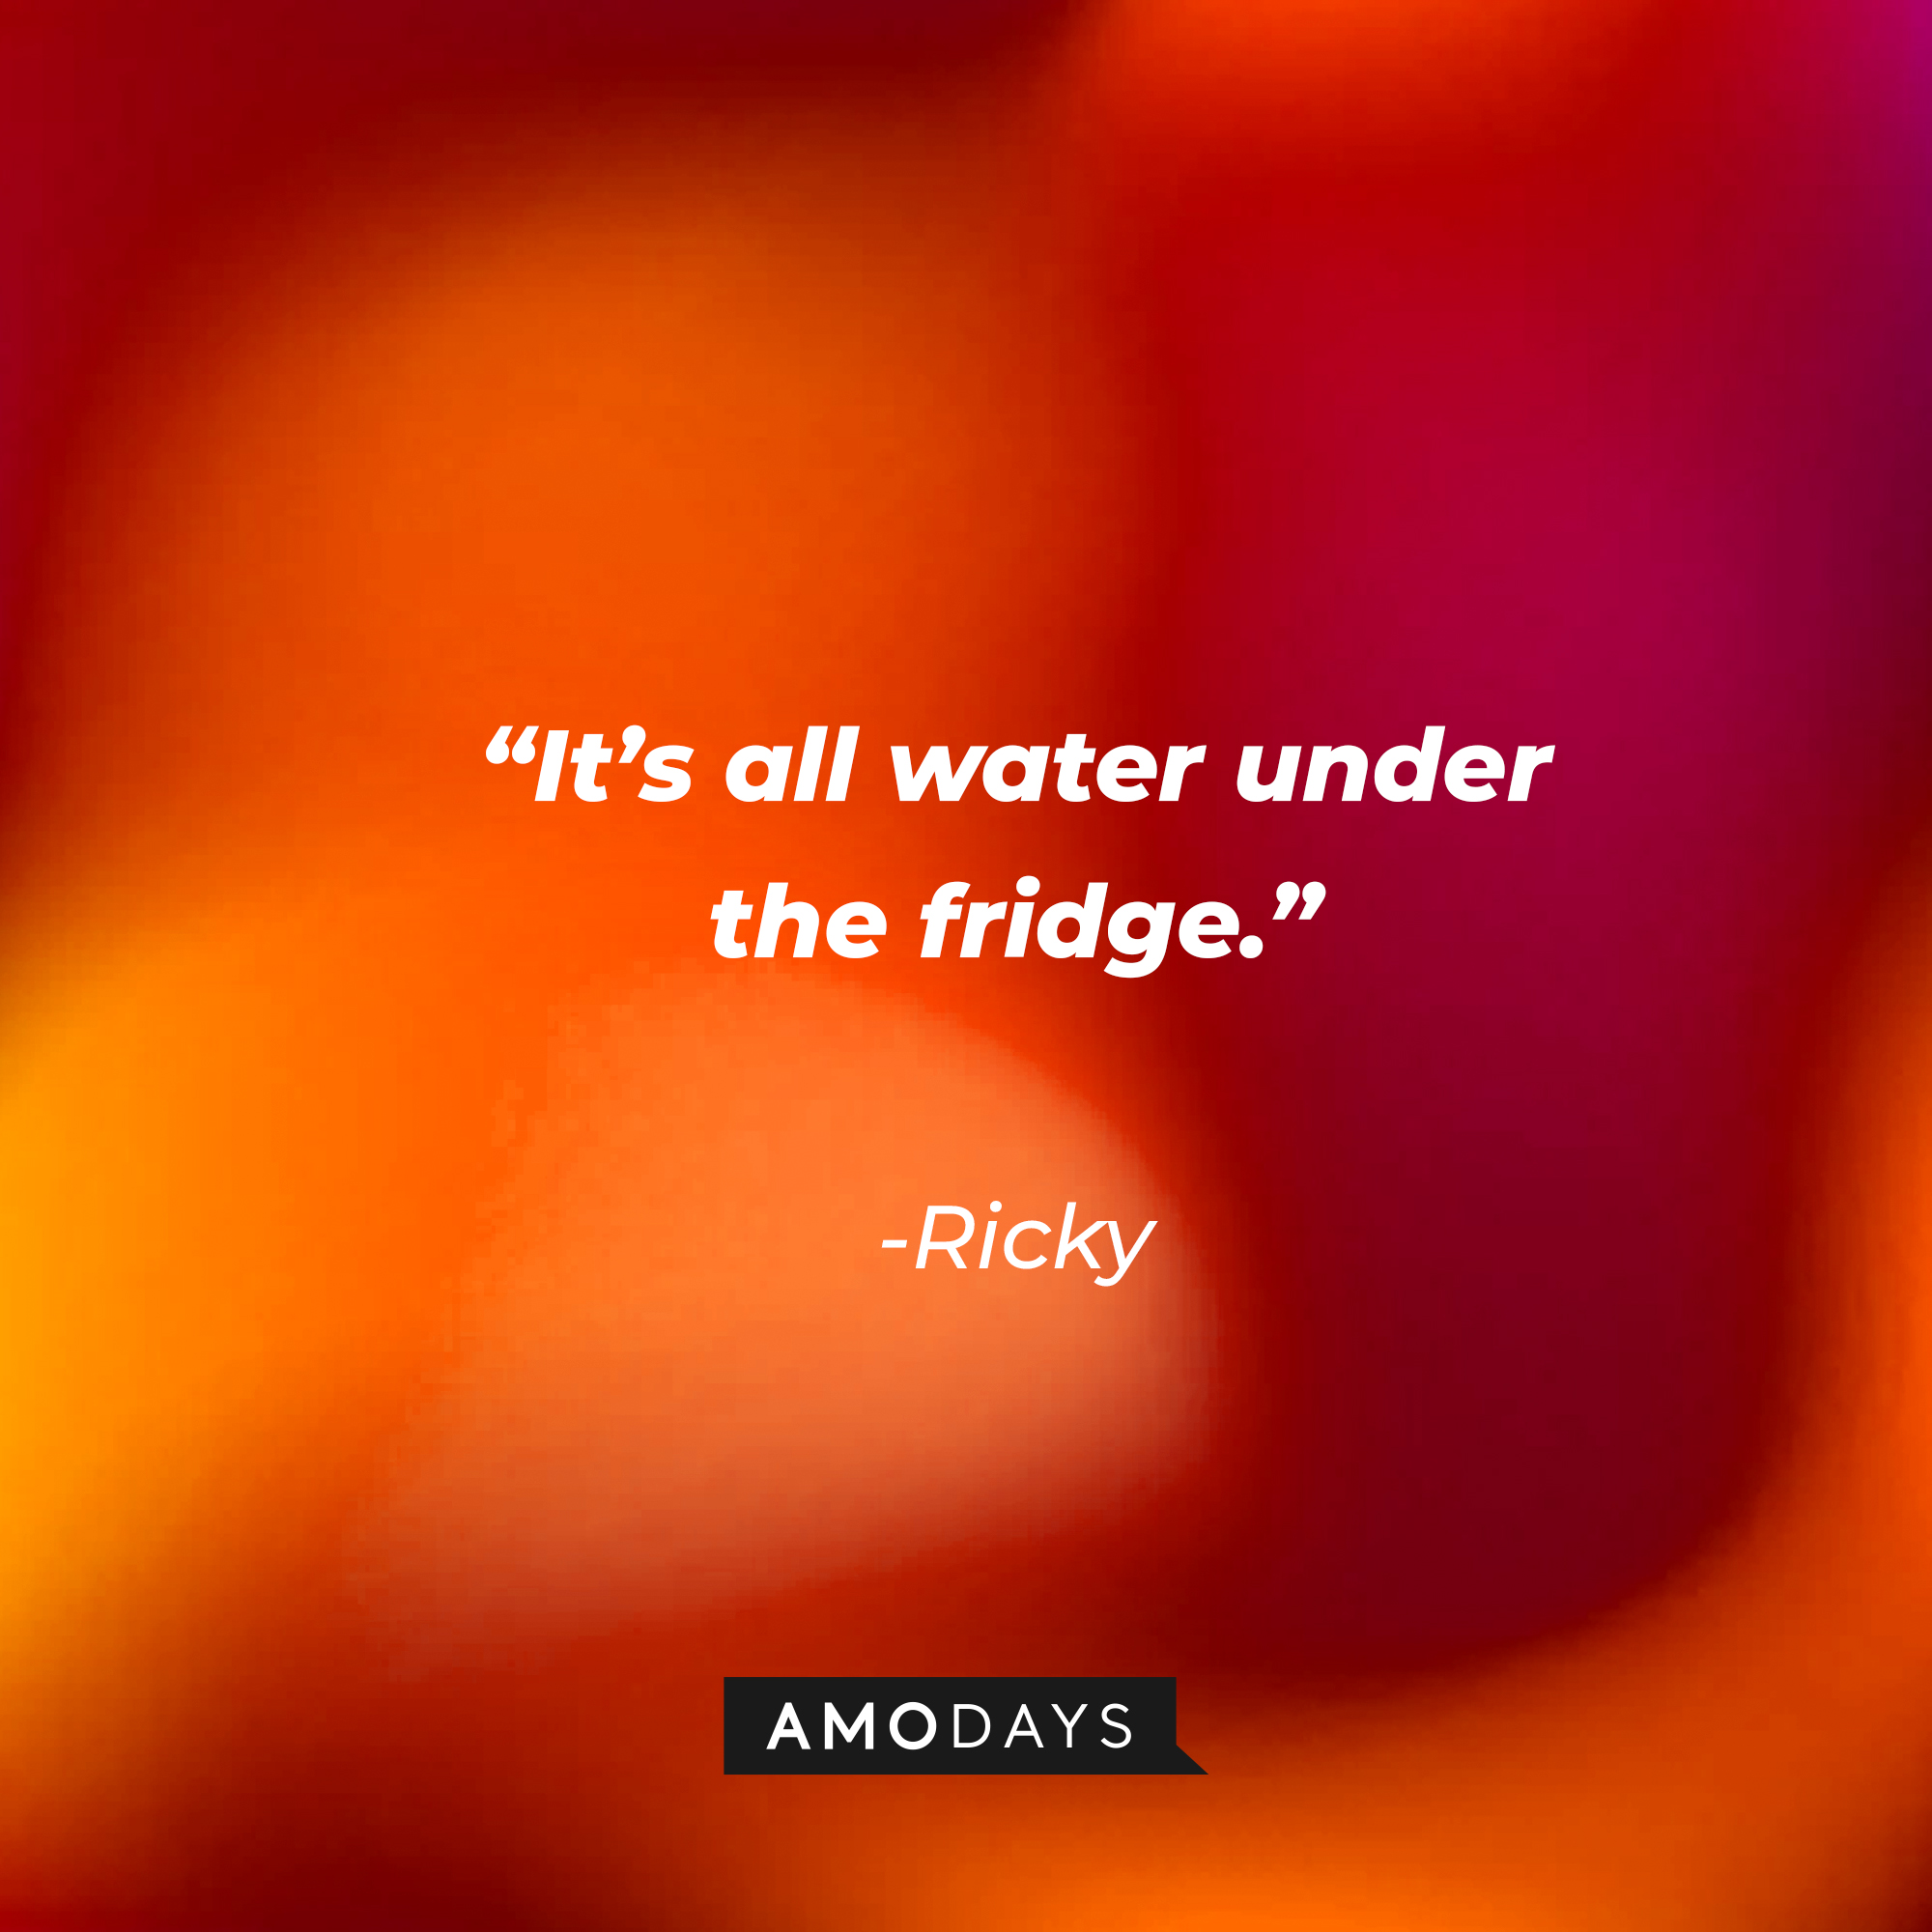 Ricky's quote: “It’s all water under the fridge.” | Source: Amodays